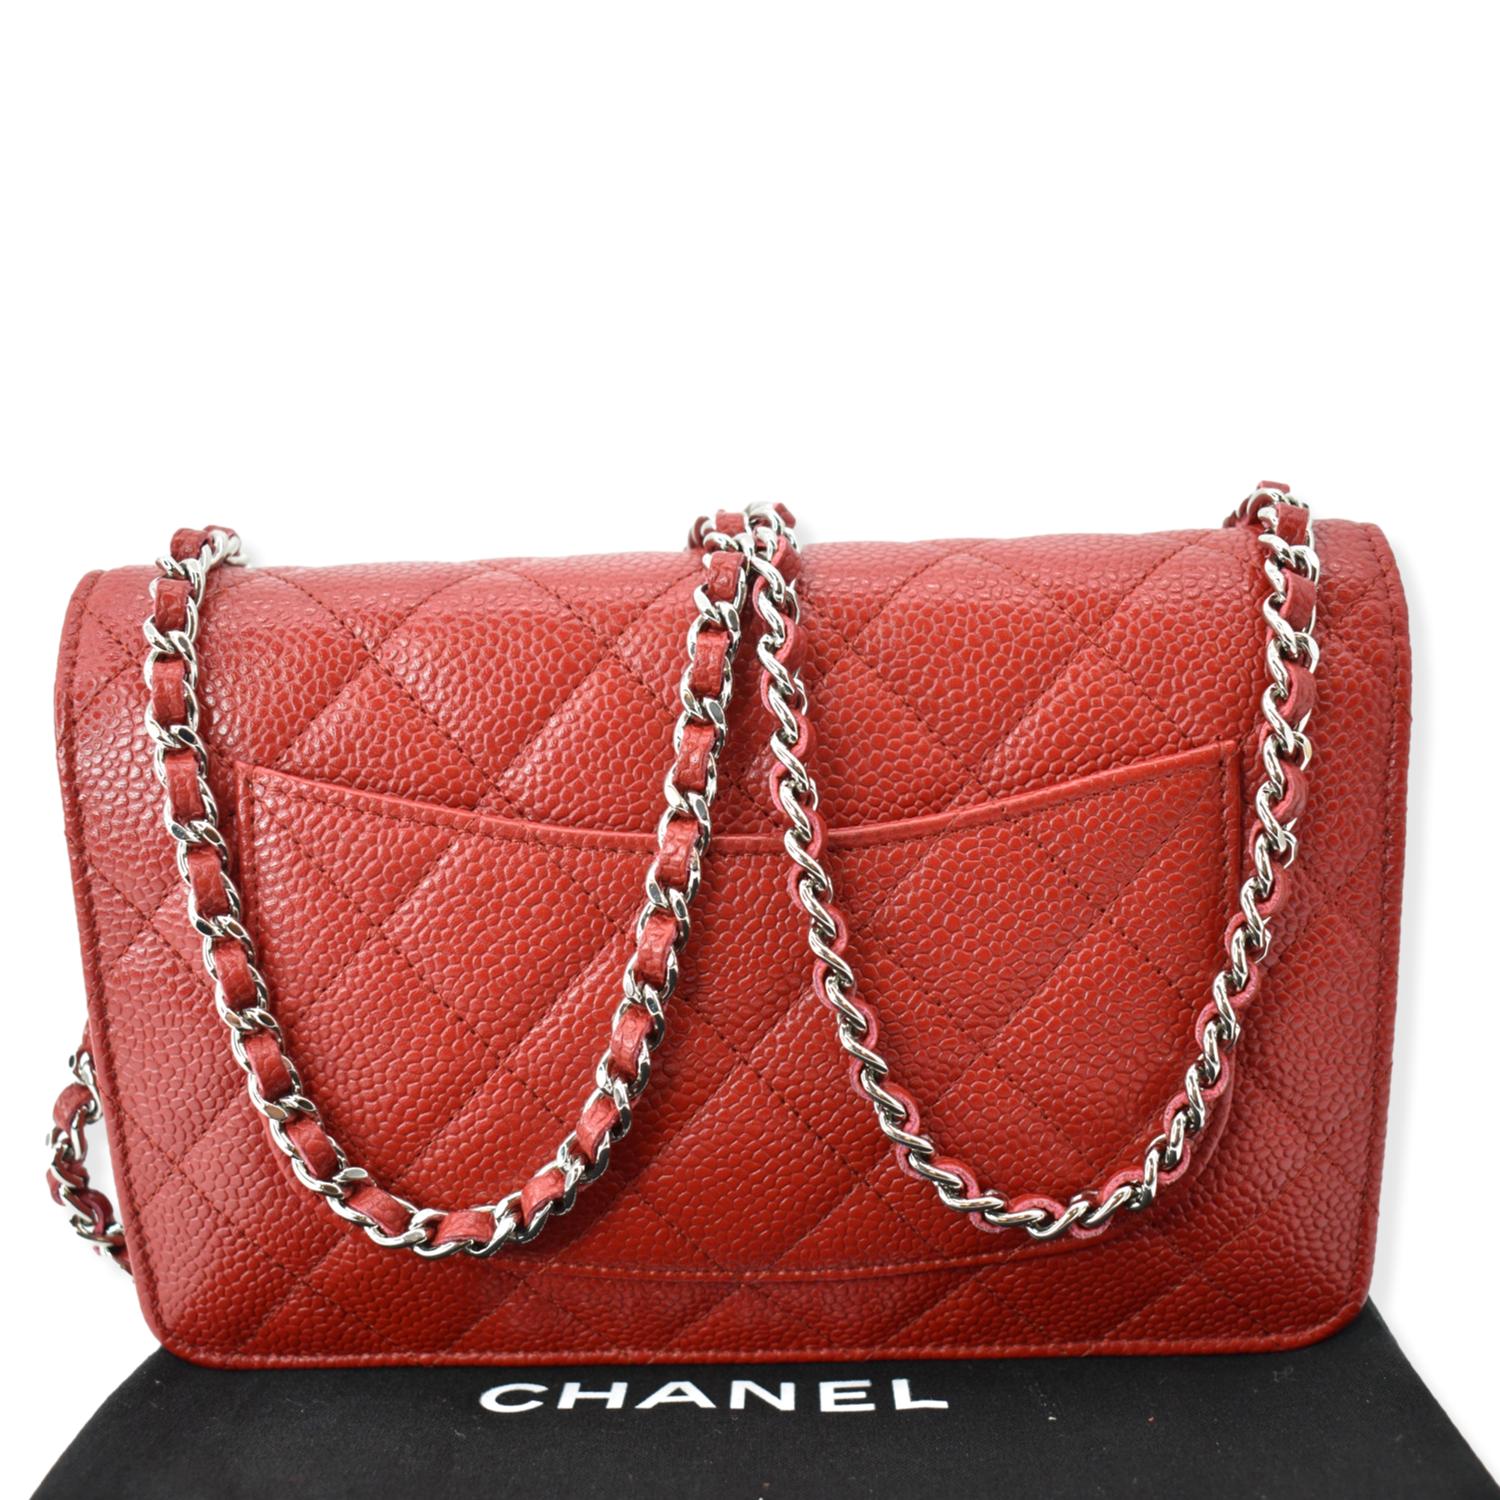 CHANEL, Bags, Jus For Share My Chanel Collections